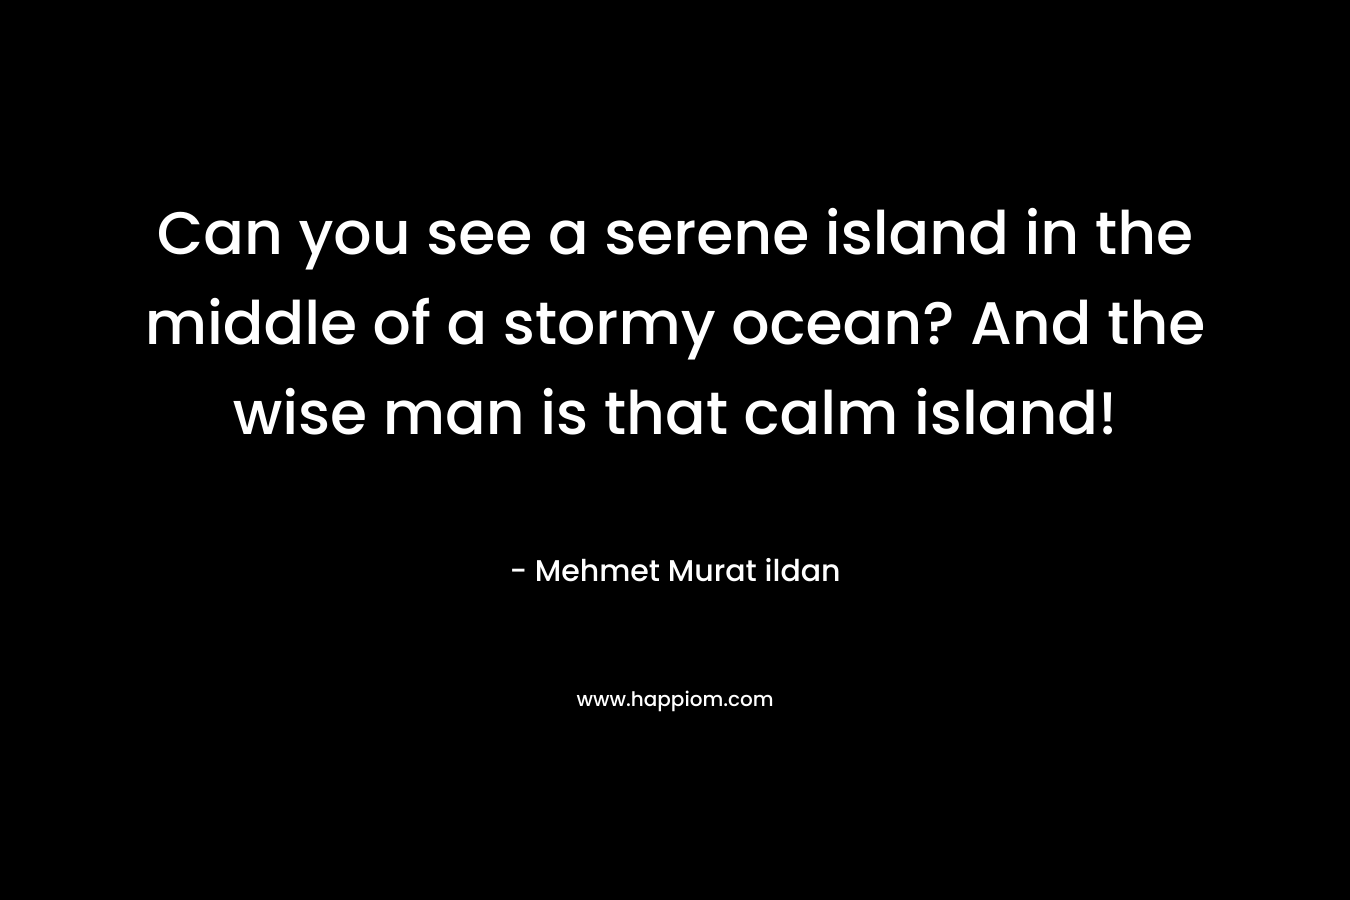 Can you see a serene island in the middle of a stormy ocean? And the wise man is that calm island!